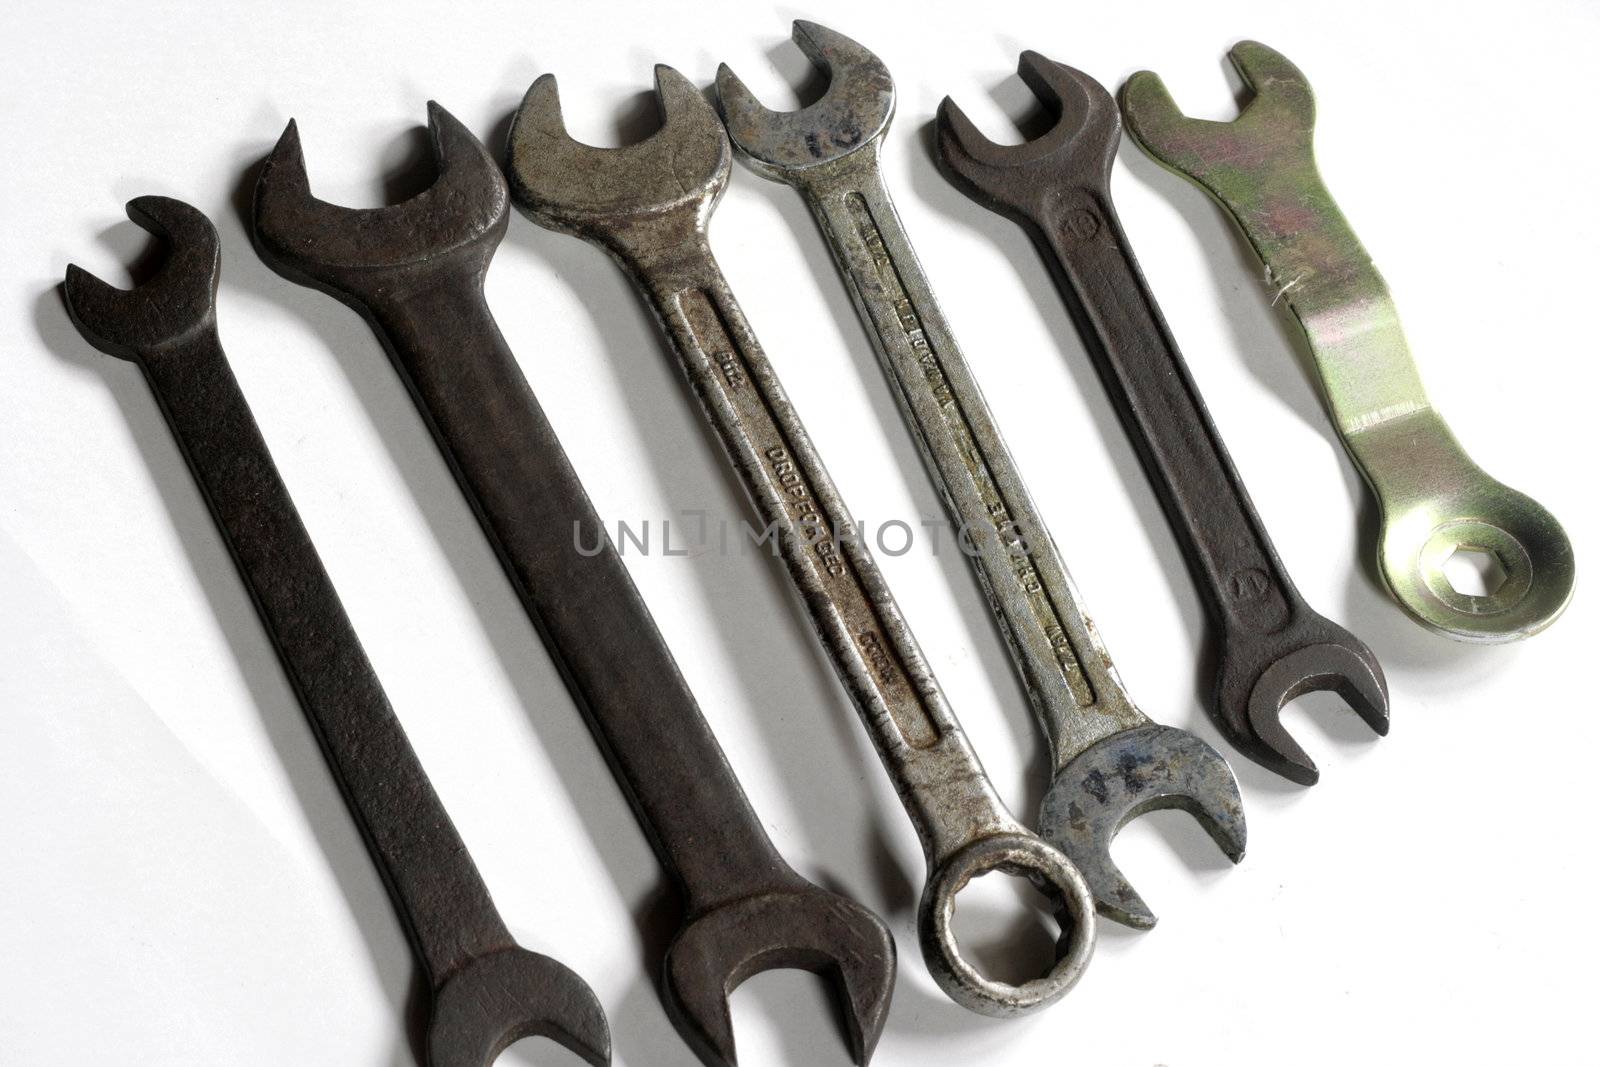 Set of Spanners of different sizes and made